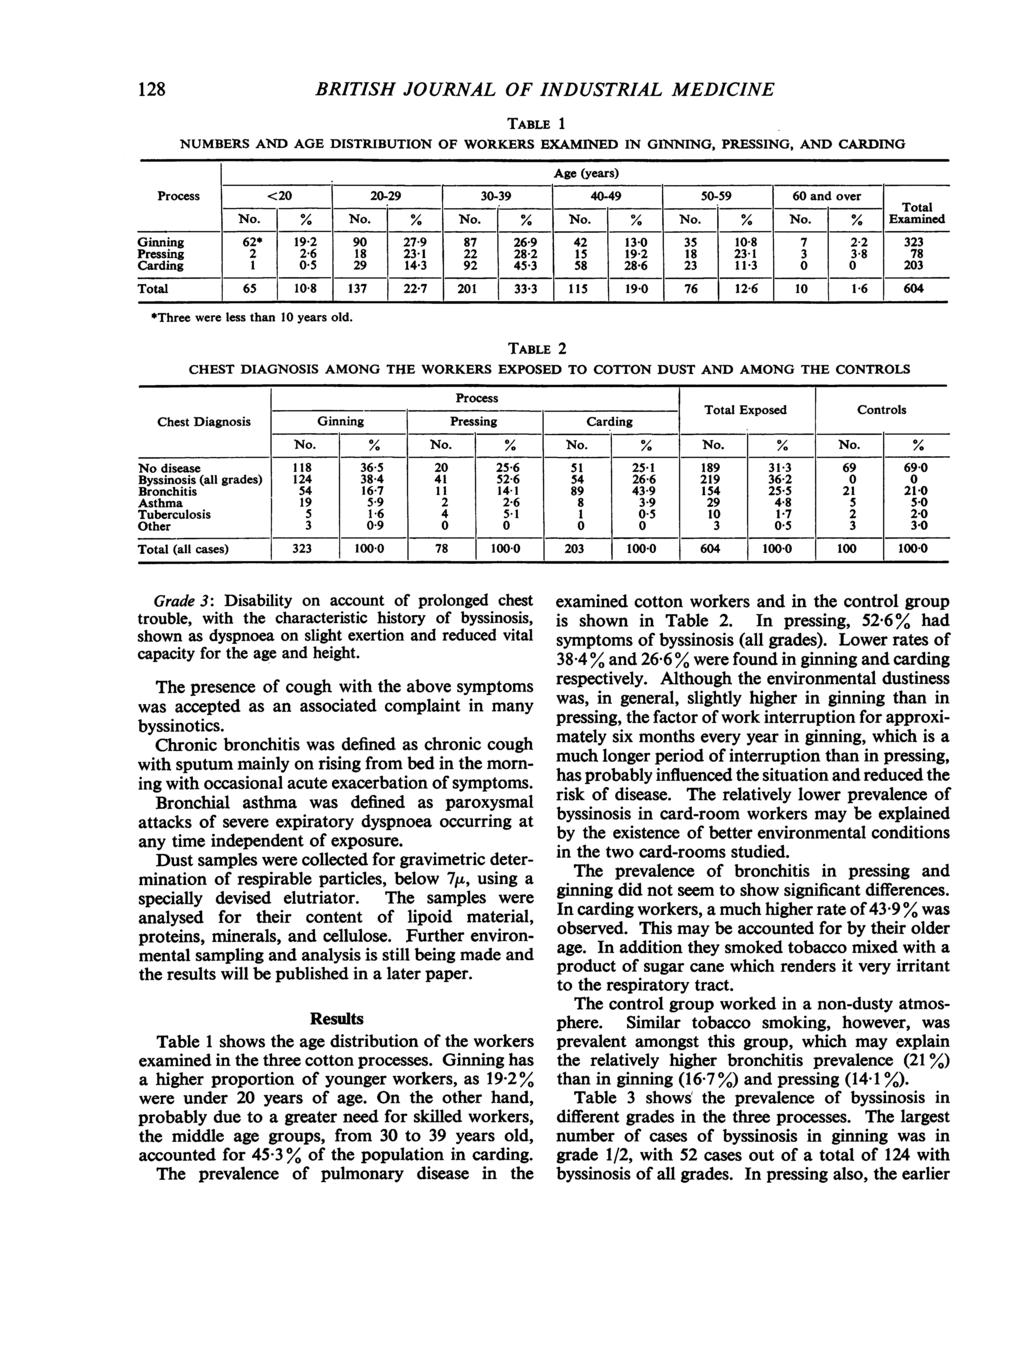 128 BRITISH JOURNAL OF INDUSTRIAL MEDICINE TABLE 1 NUMBERS AND AGE DISTRIBUTION OF WORKERS EXAMINED IN GINNING, PRESSING, AND CARDING Age (years) Process <20 20-29 30-39 40-49 50-59 60 and over No.